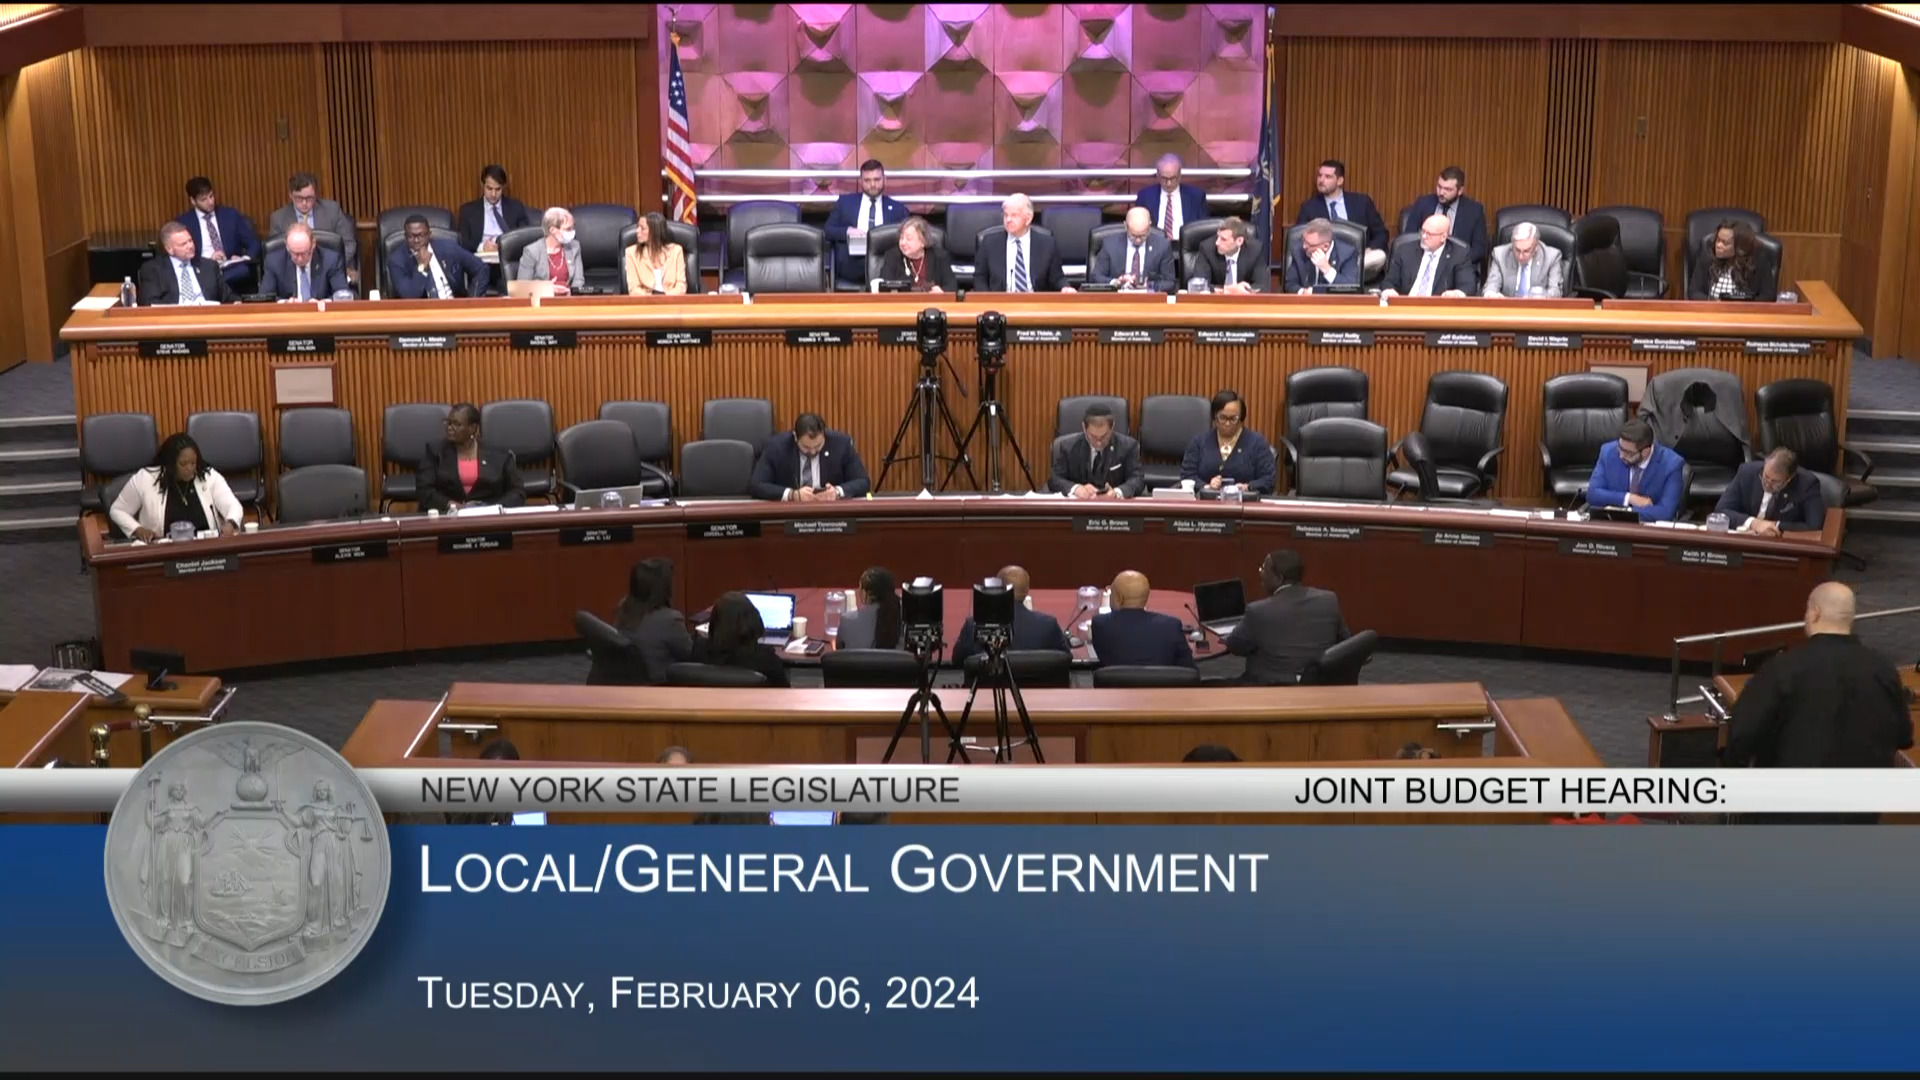 Mayor Adams Testifies During Budget Hearing on Local/General Government